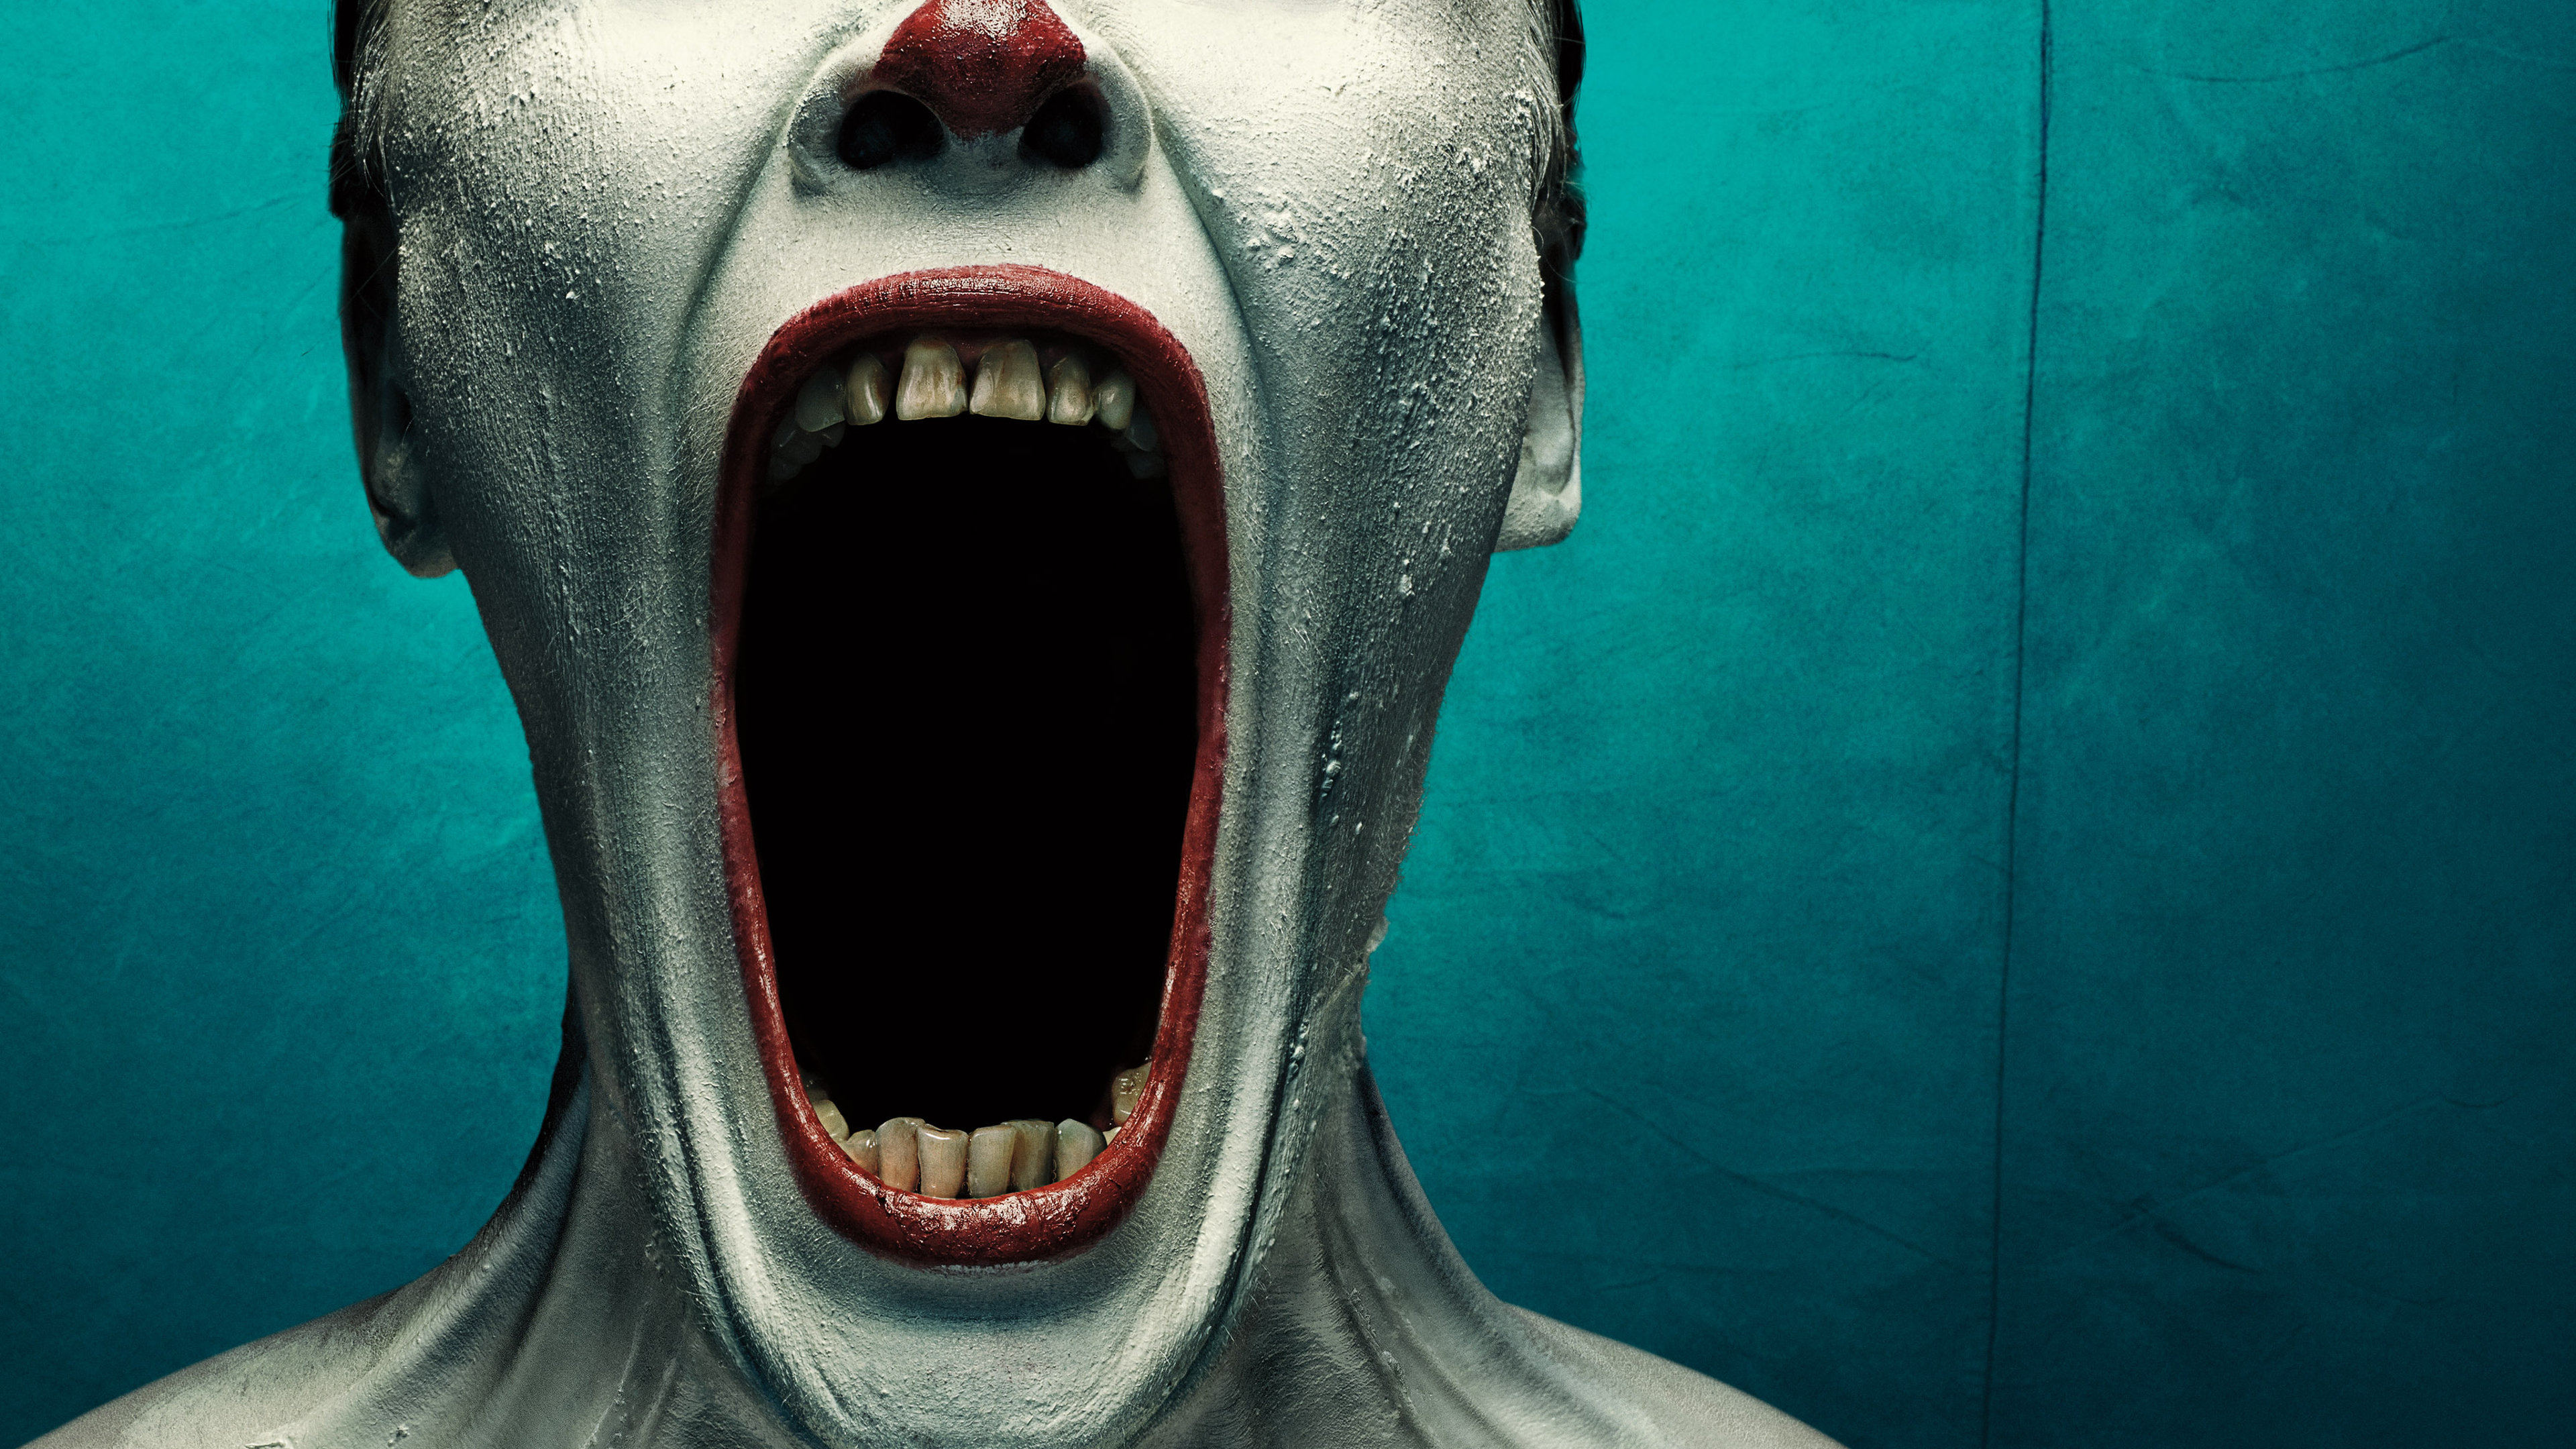 horror wallpaper,facial expression,jaw,head,mouth,shout